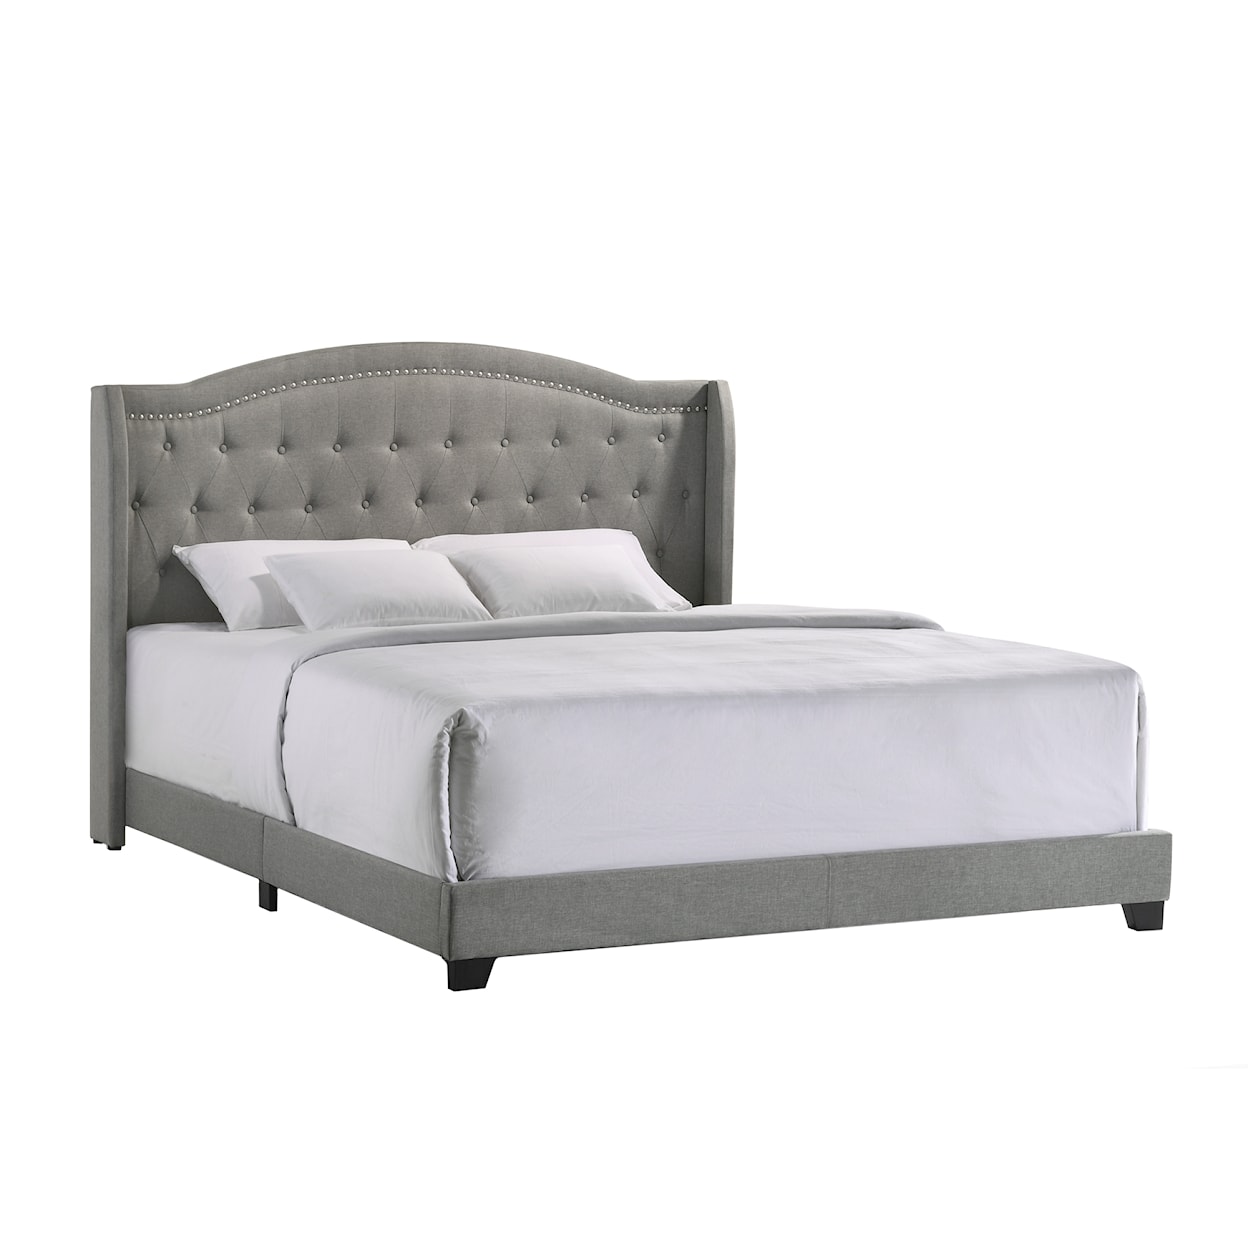 Intercon Upholstered Beds Rhyan King Upholstered Bed